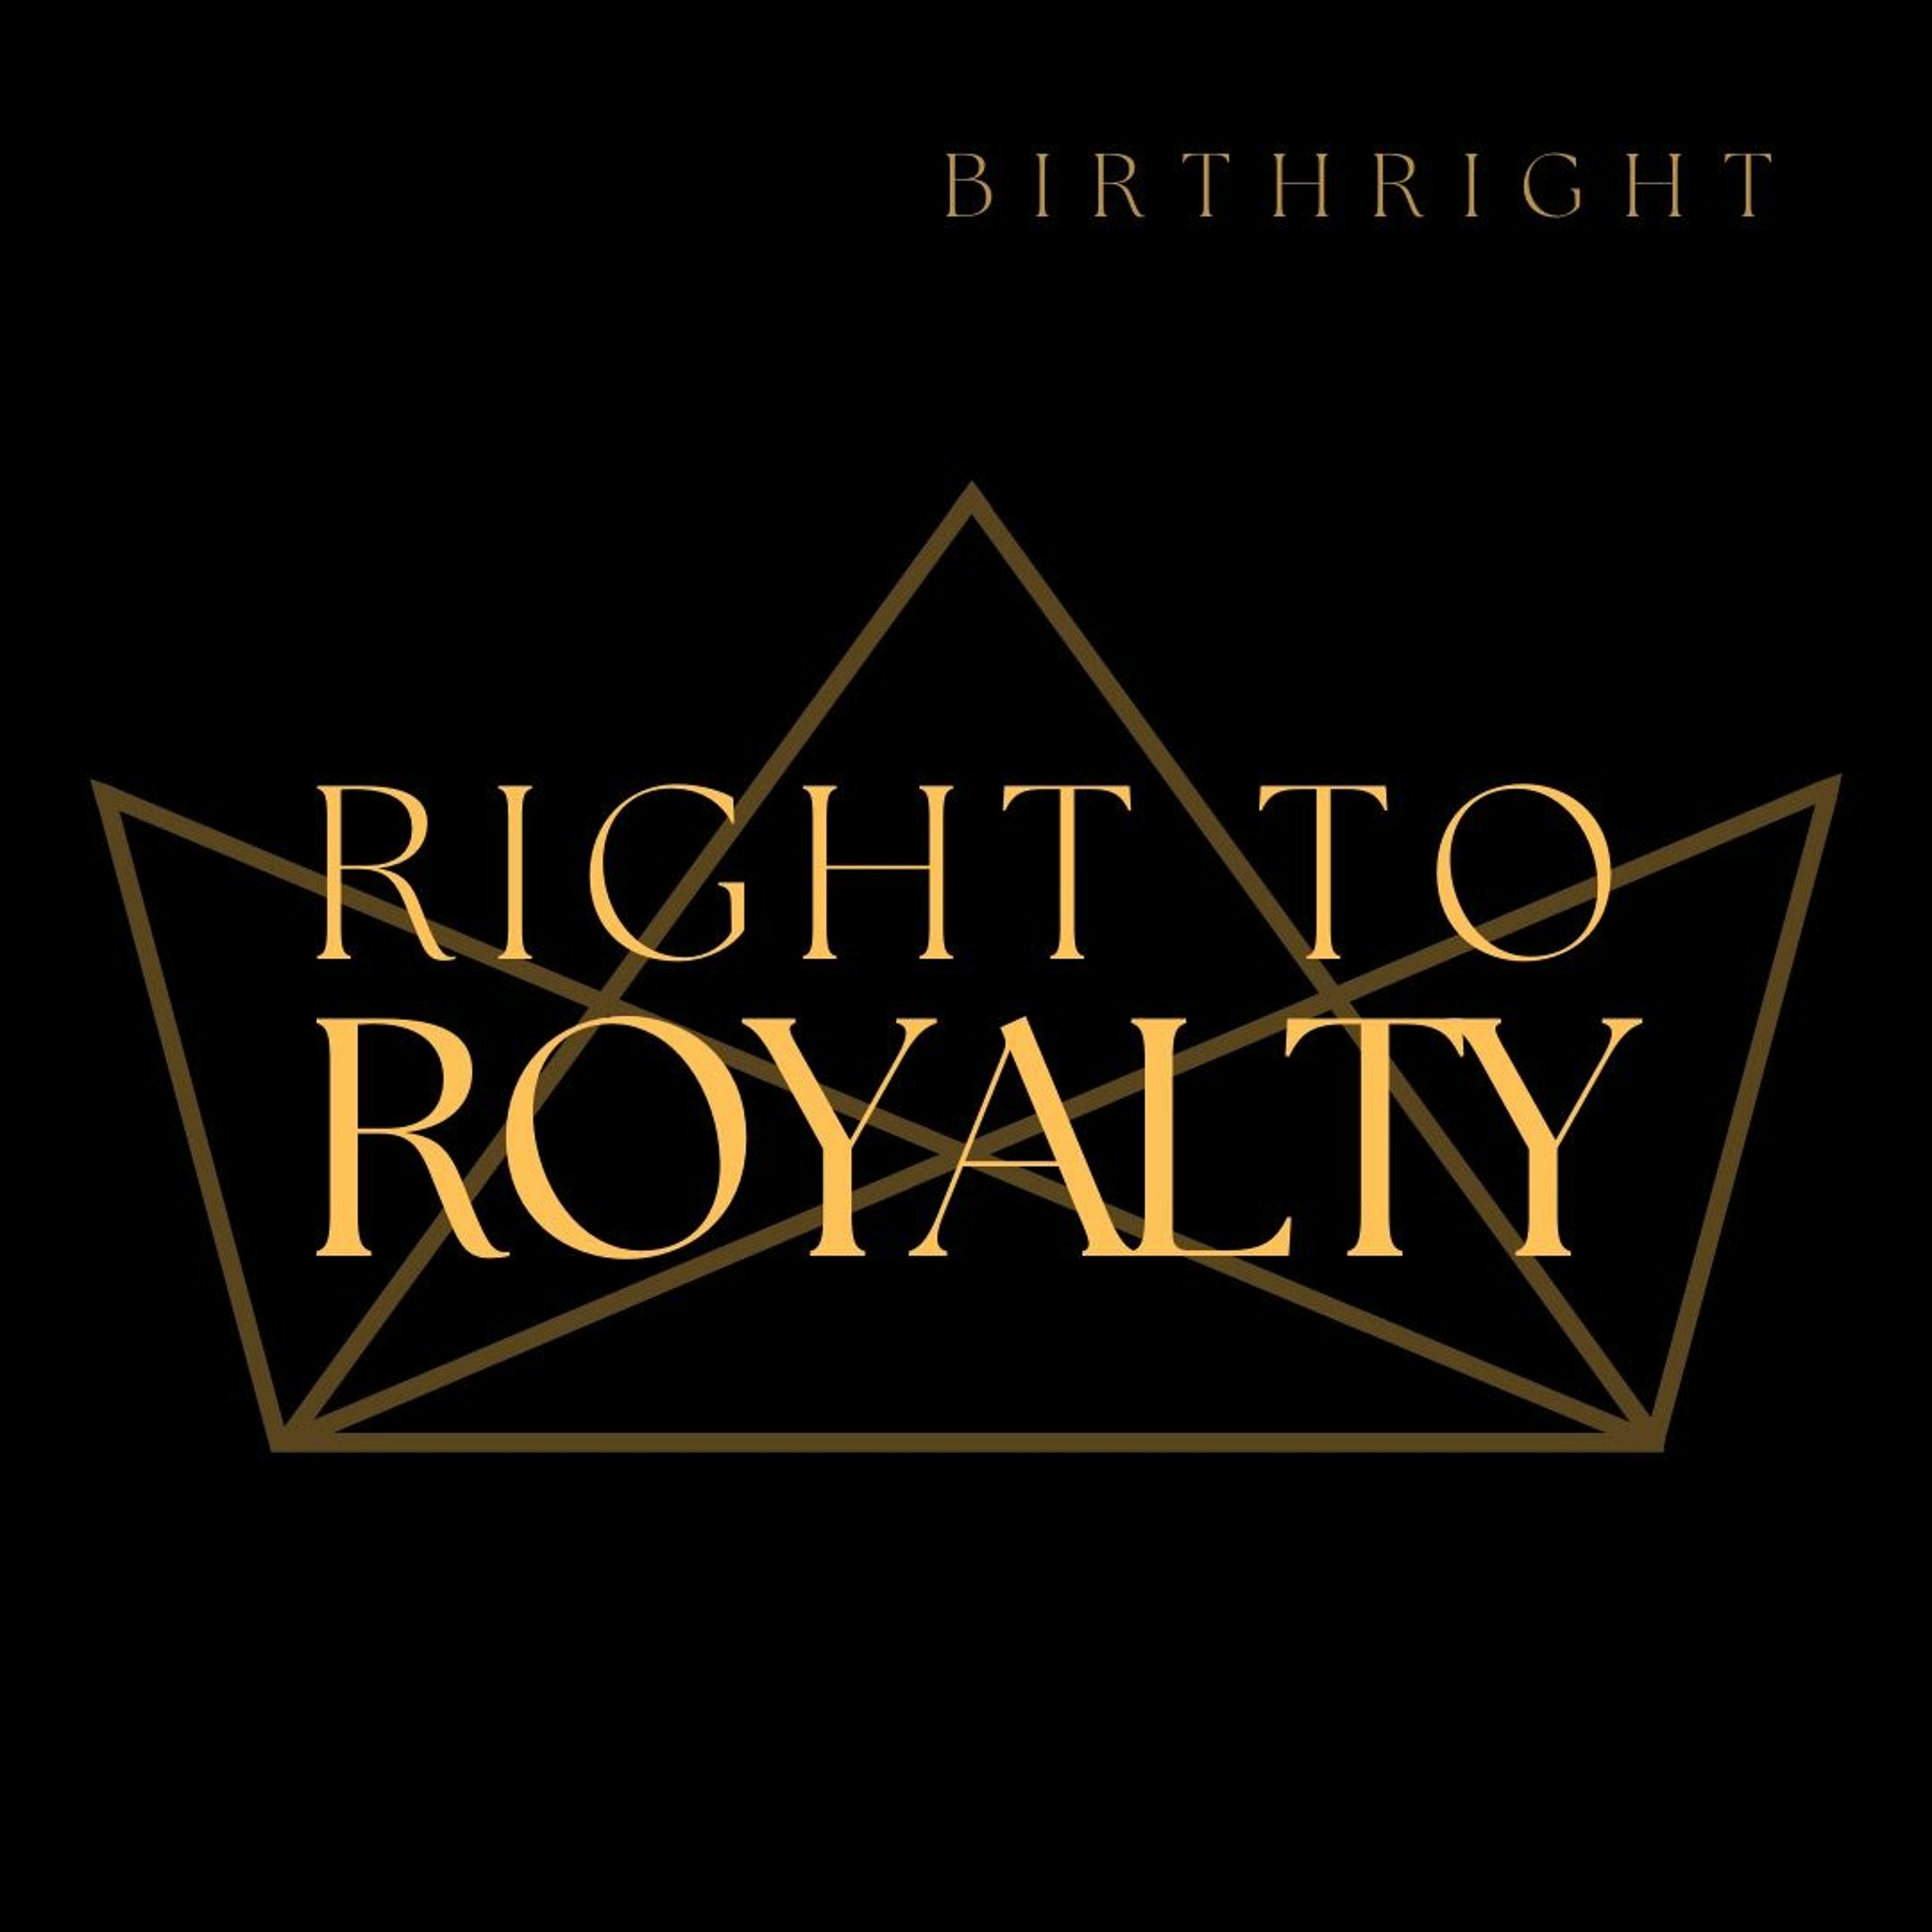 Right to Royalty - Royal Presence | Derek Quinby